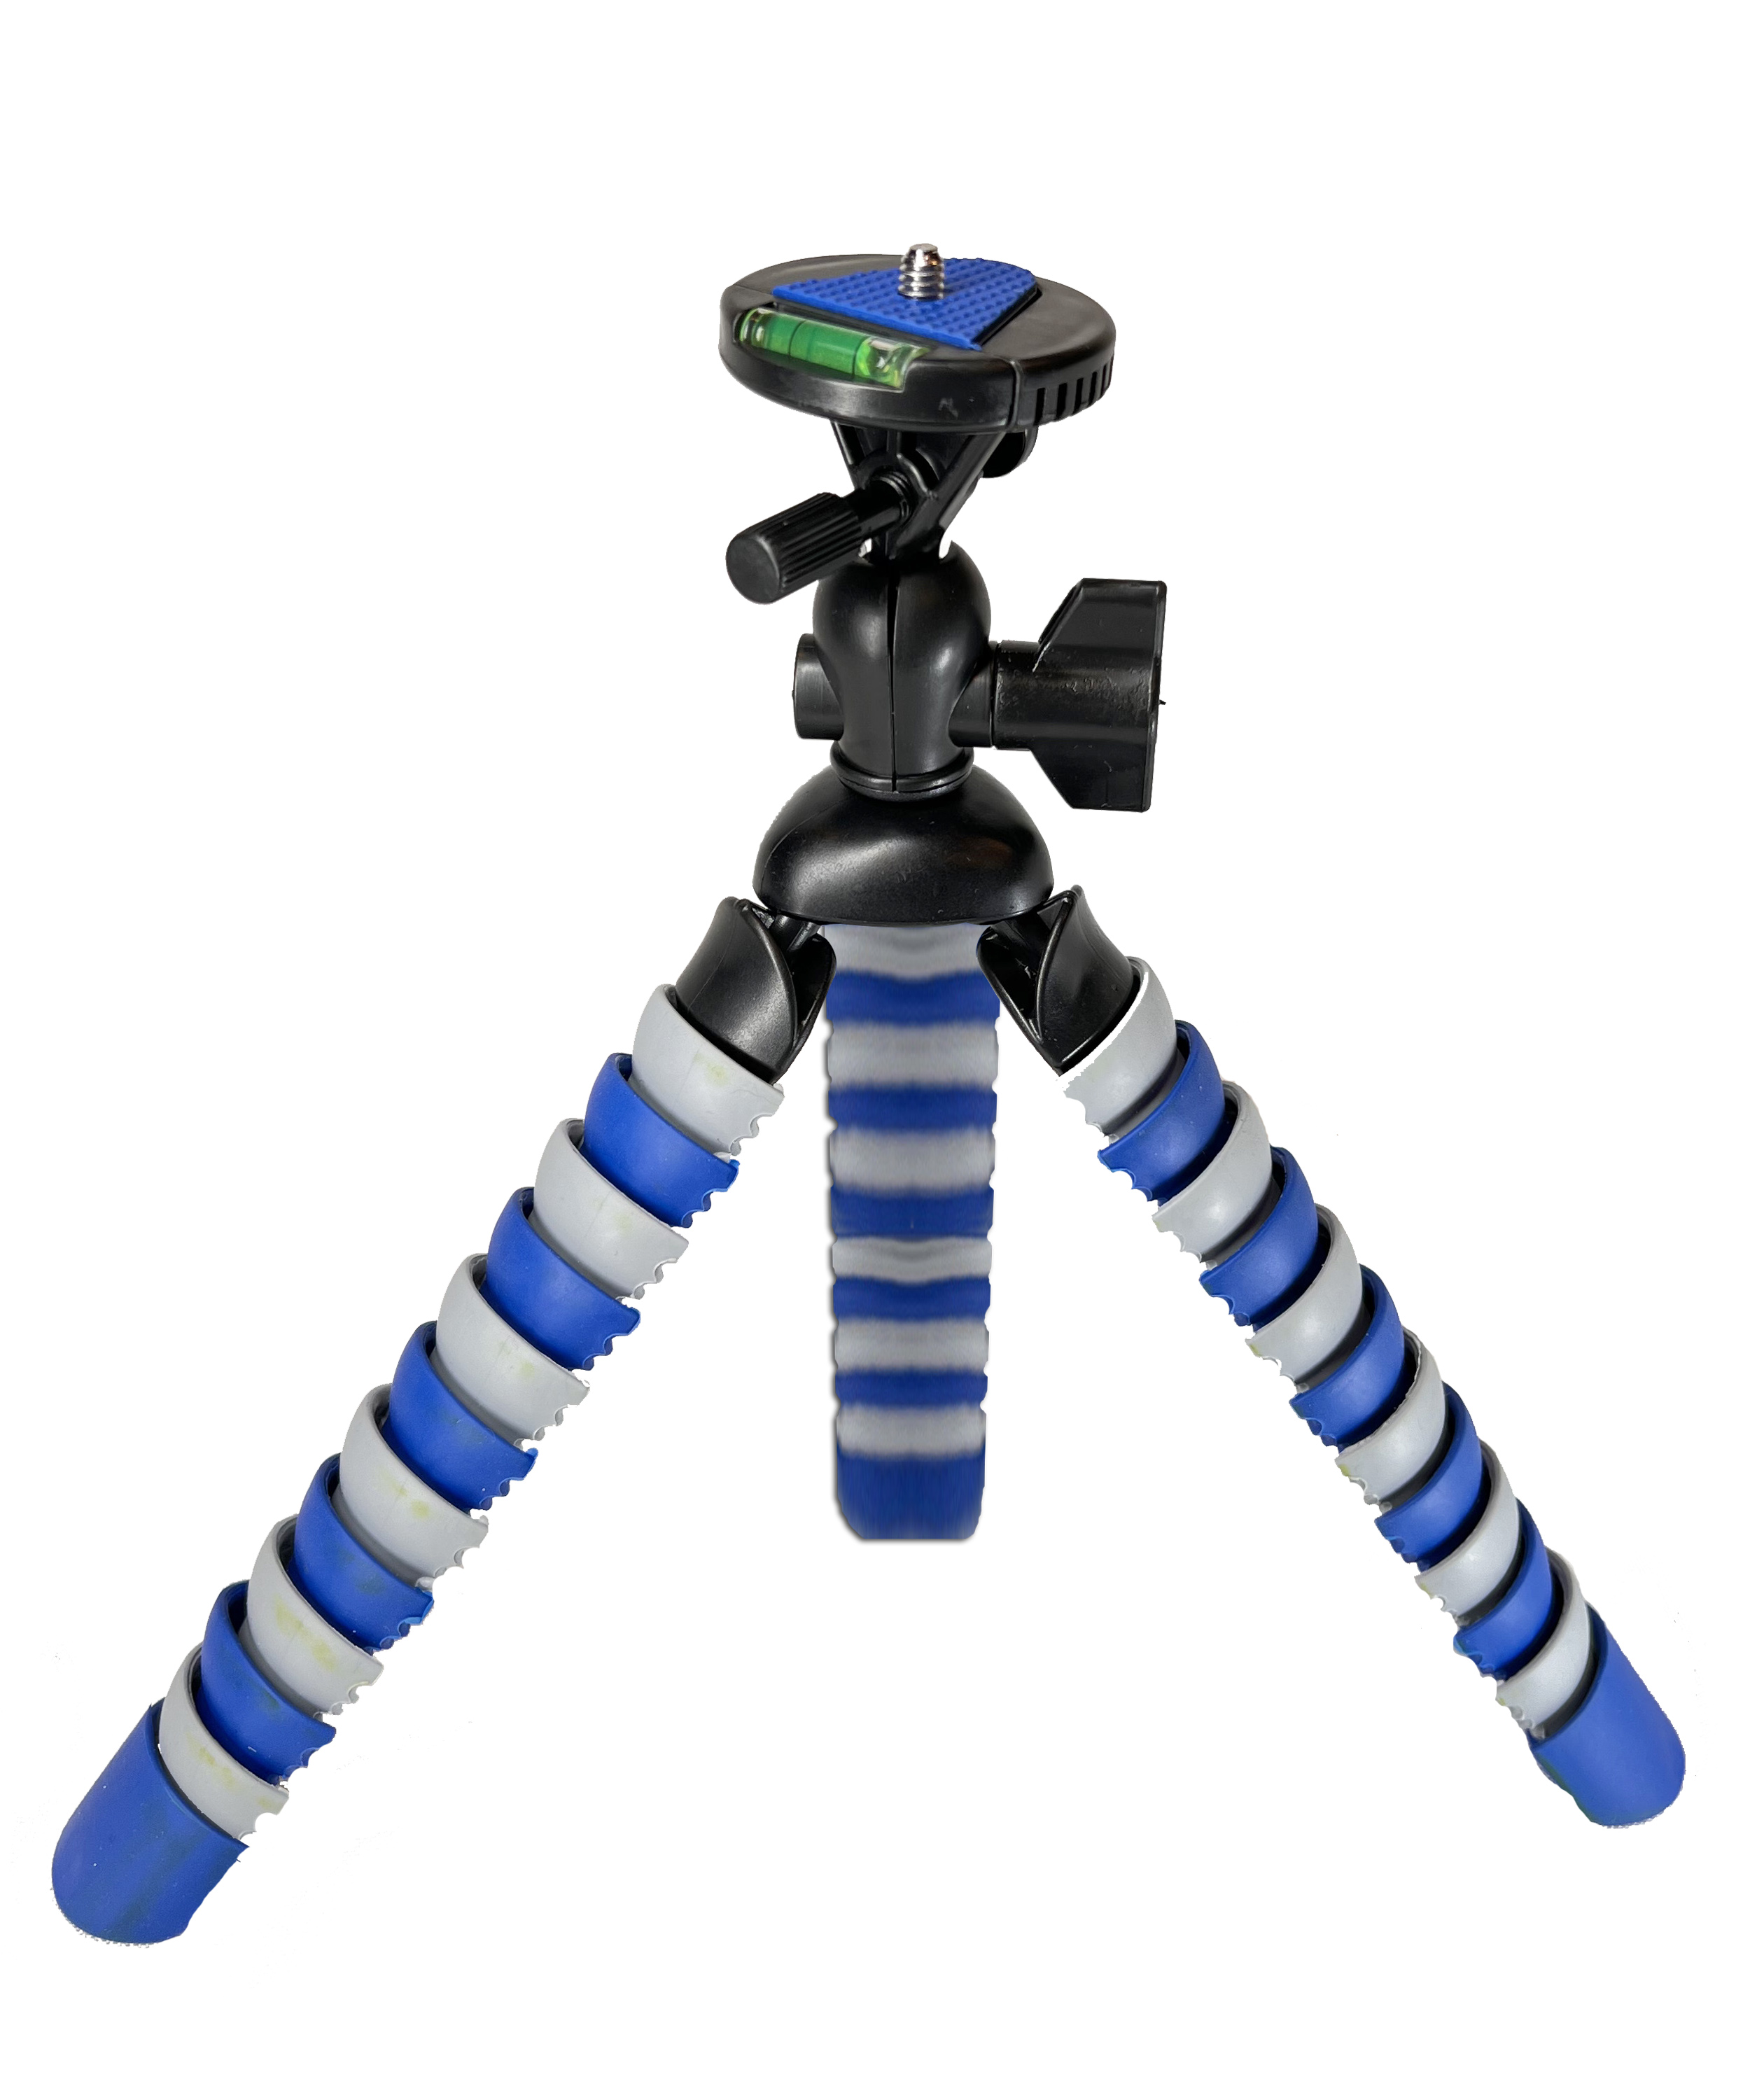 Synergy Digital Flexible 13" Tripod, Compatible with DSLR Cameras and Camcorders